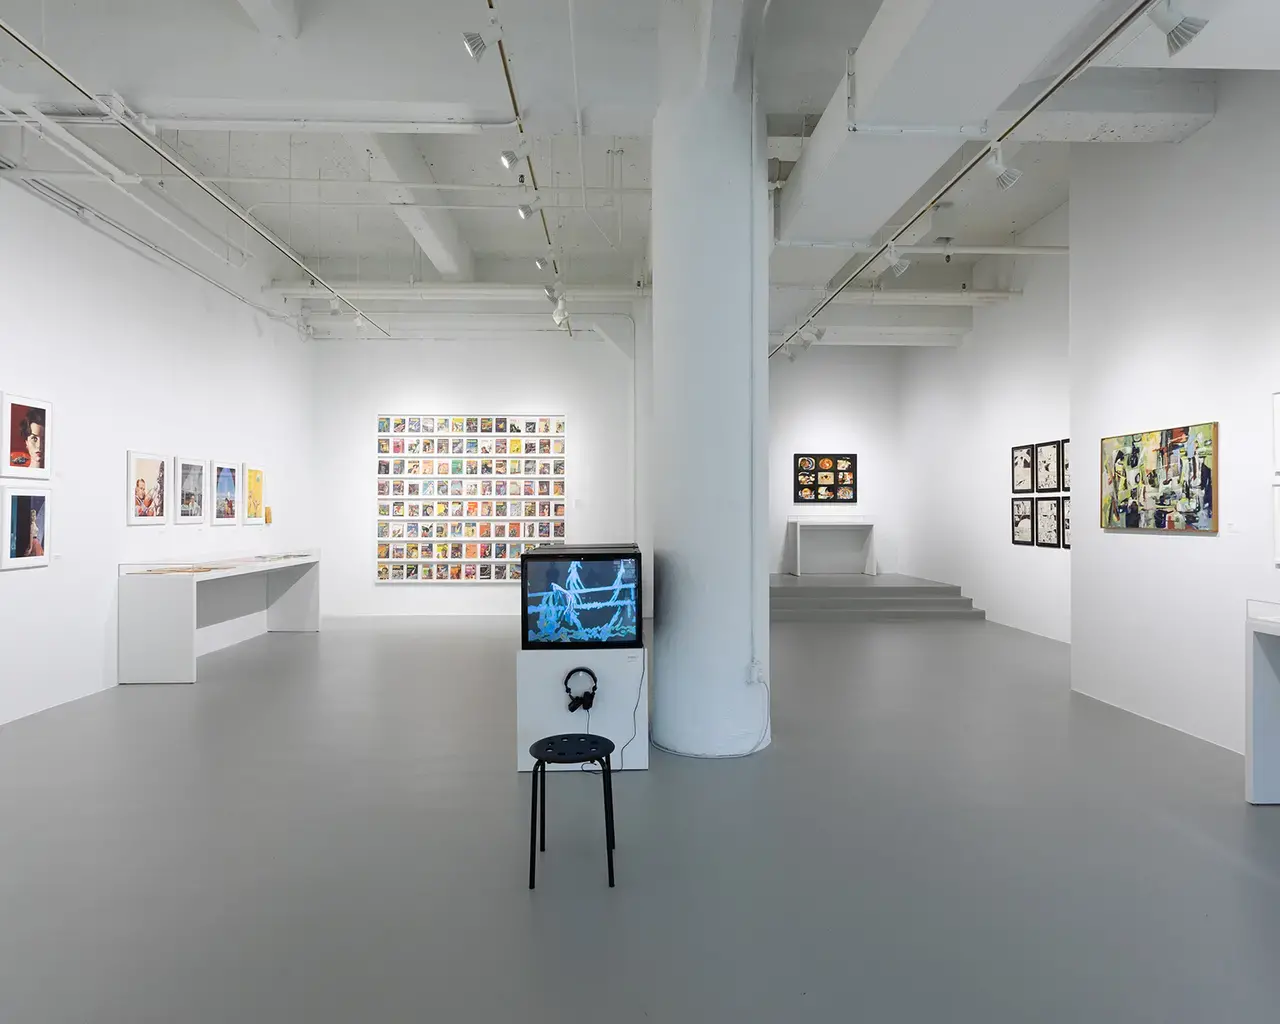 Dream Dance: The Art of Ed Emshwiller, Lightbox Film Center, installation view, 2019. Photo by Liz Waldie, courtesy of the University of the Arts.